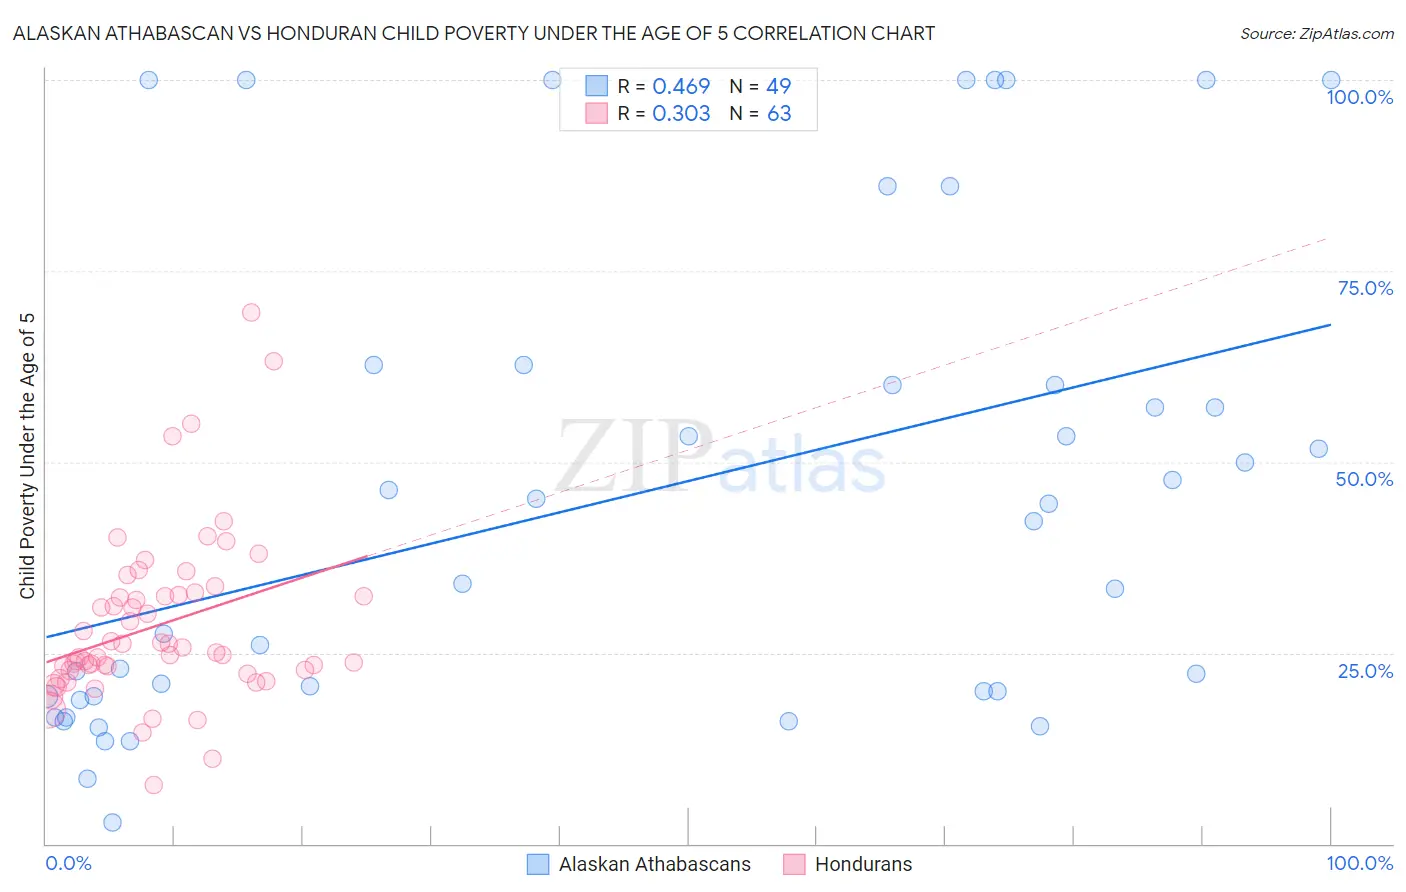 Alaskan Athabascan vs Honduran Child Poverty Under the Age of 5